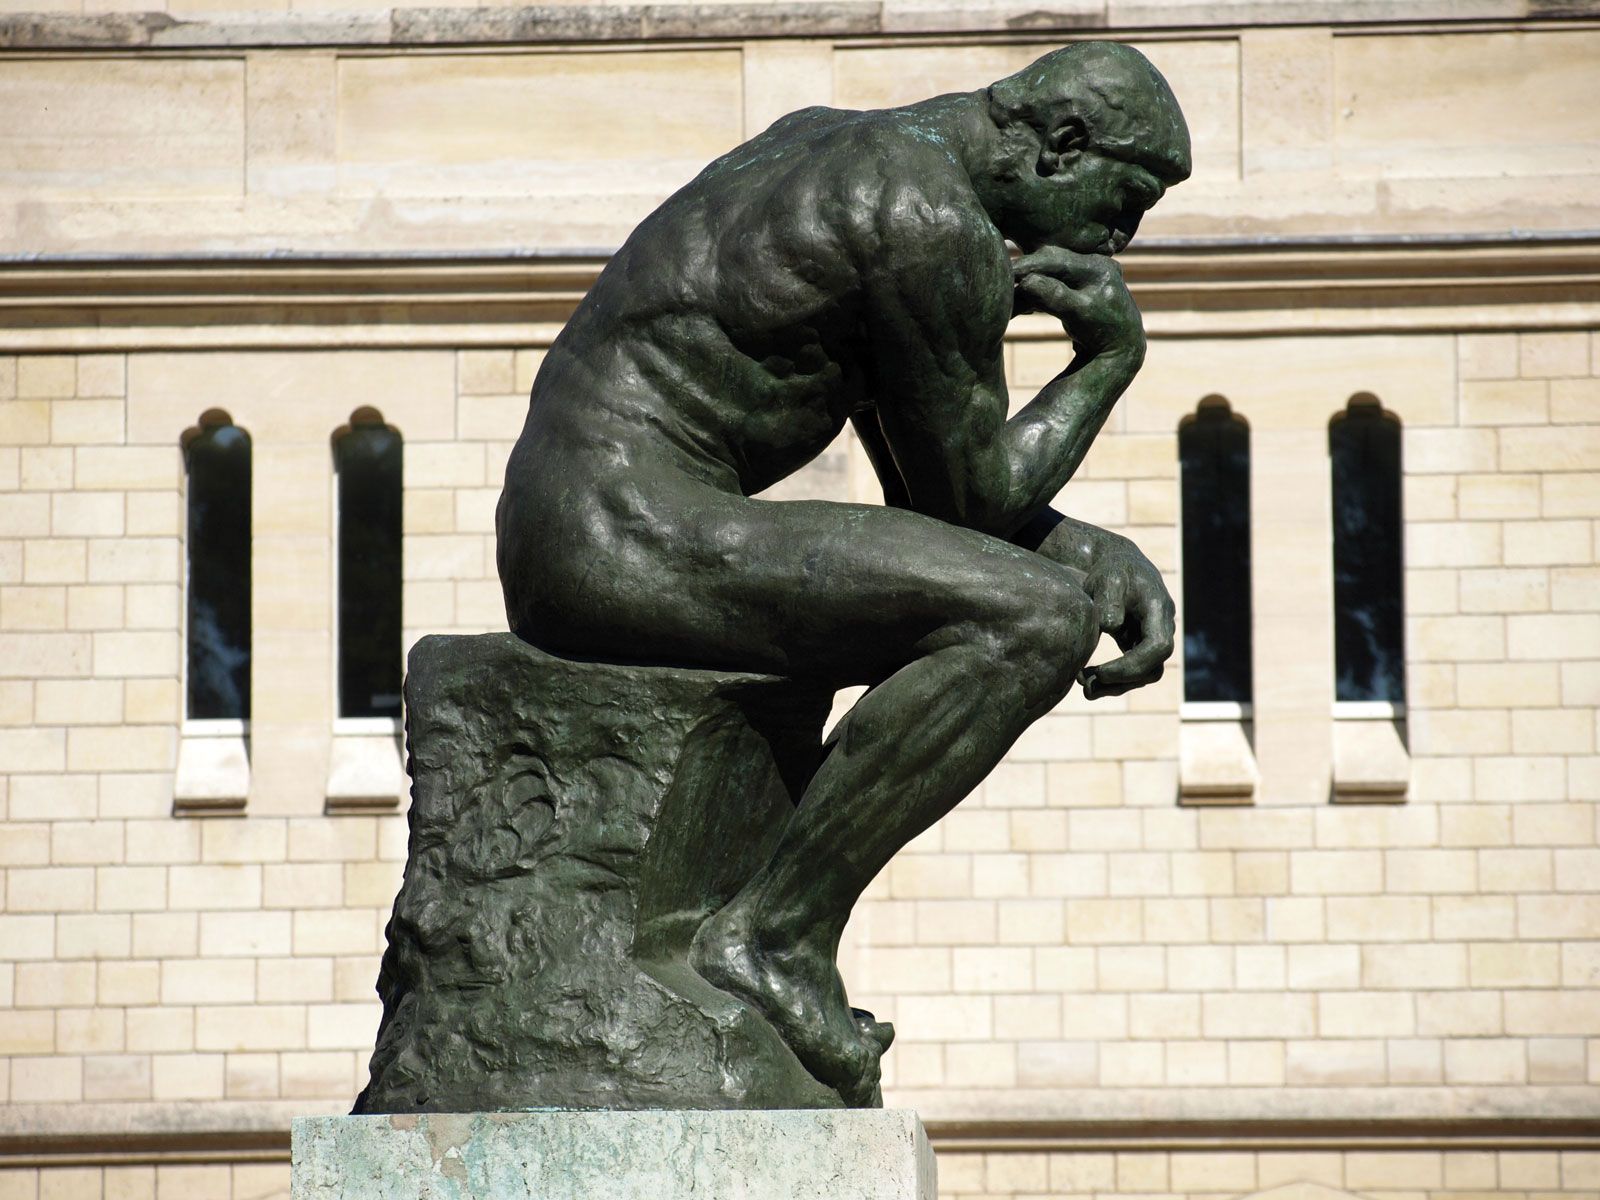 Auguste Rodin. Biography, Art, & Facts